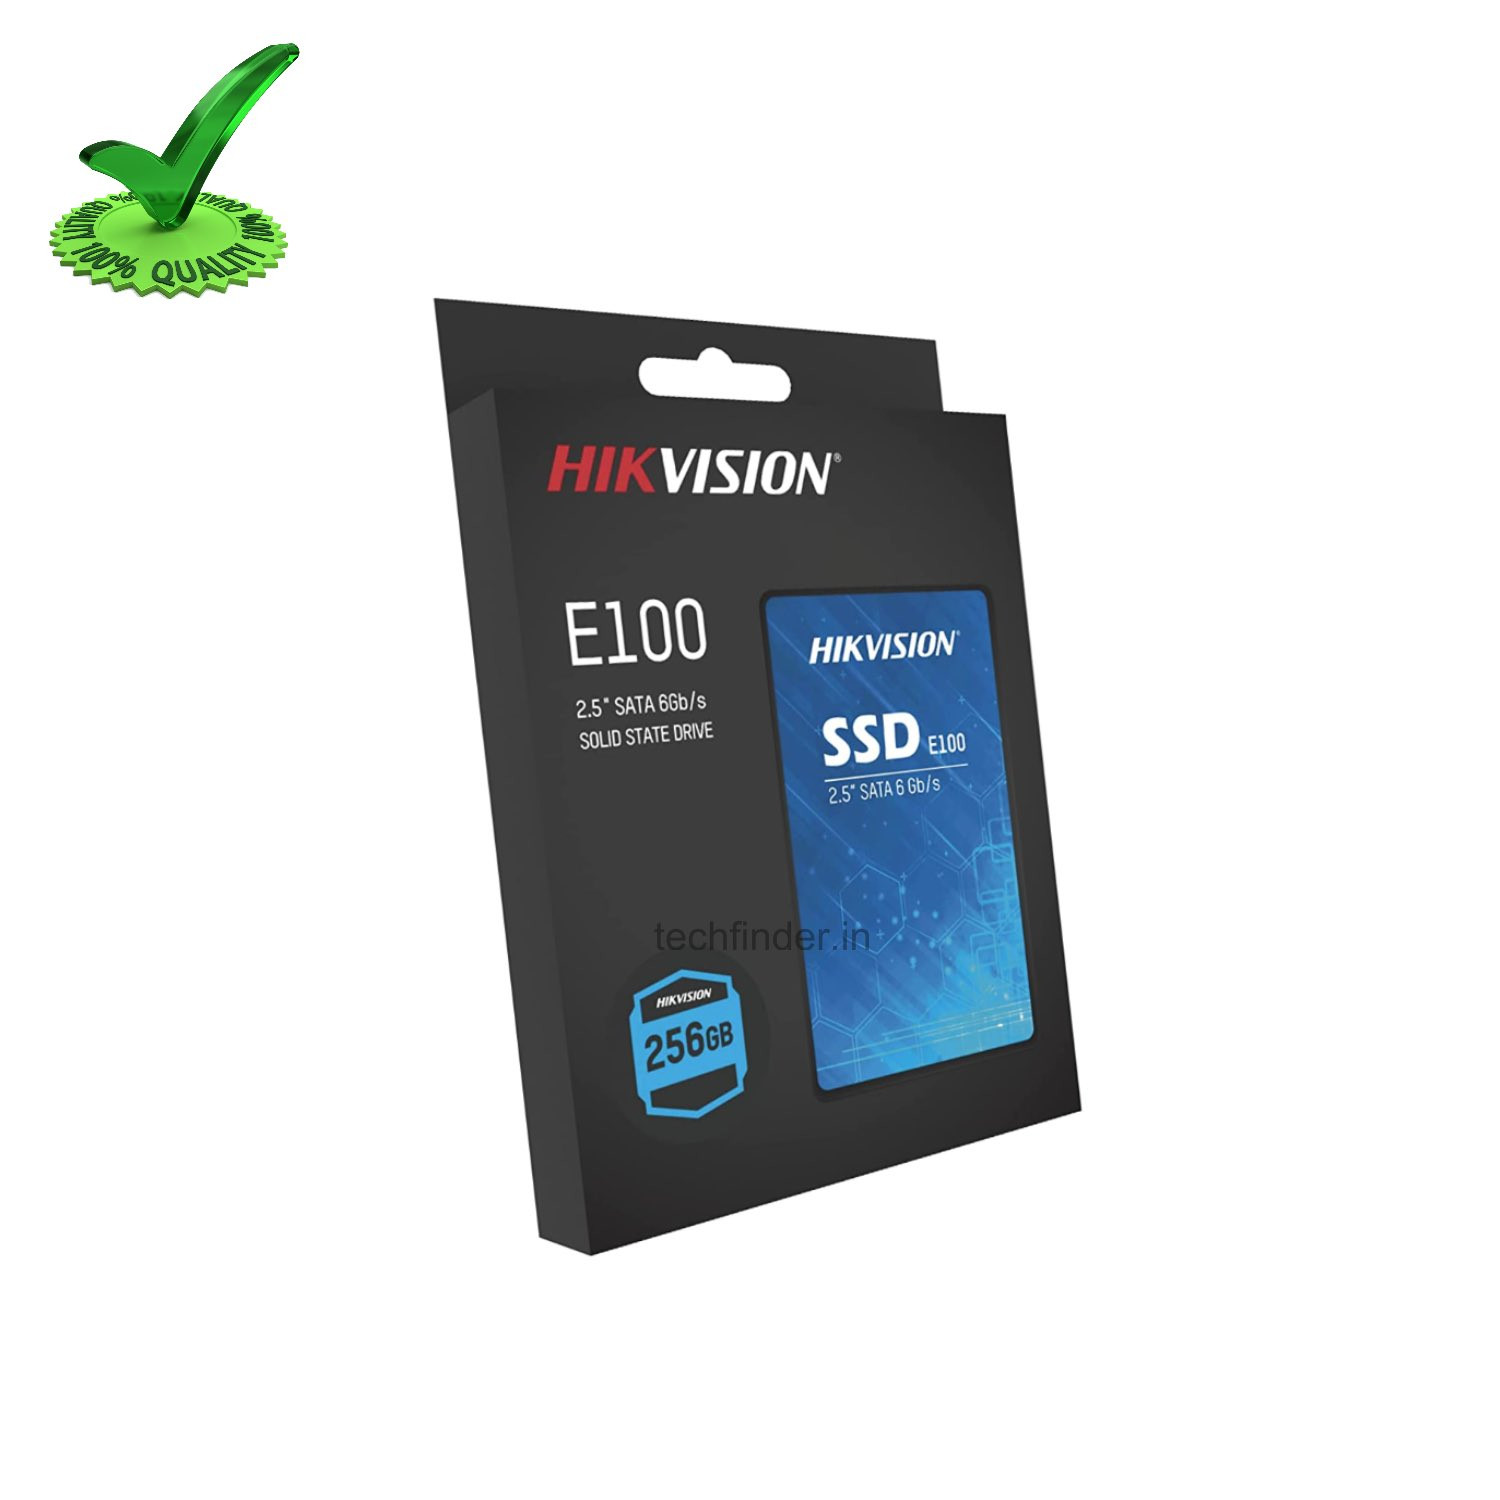 Hikvision HS-SSD-E100/256GB SSD 2.5